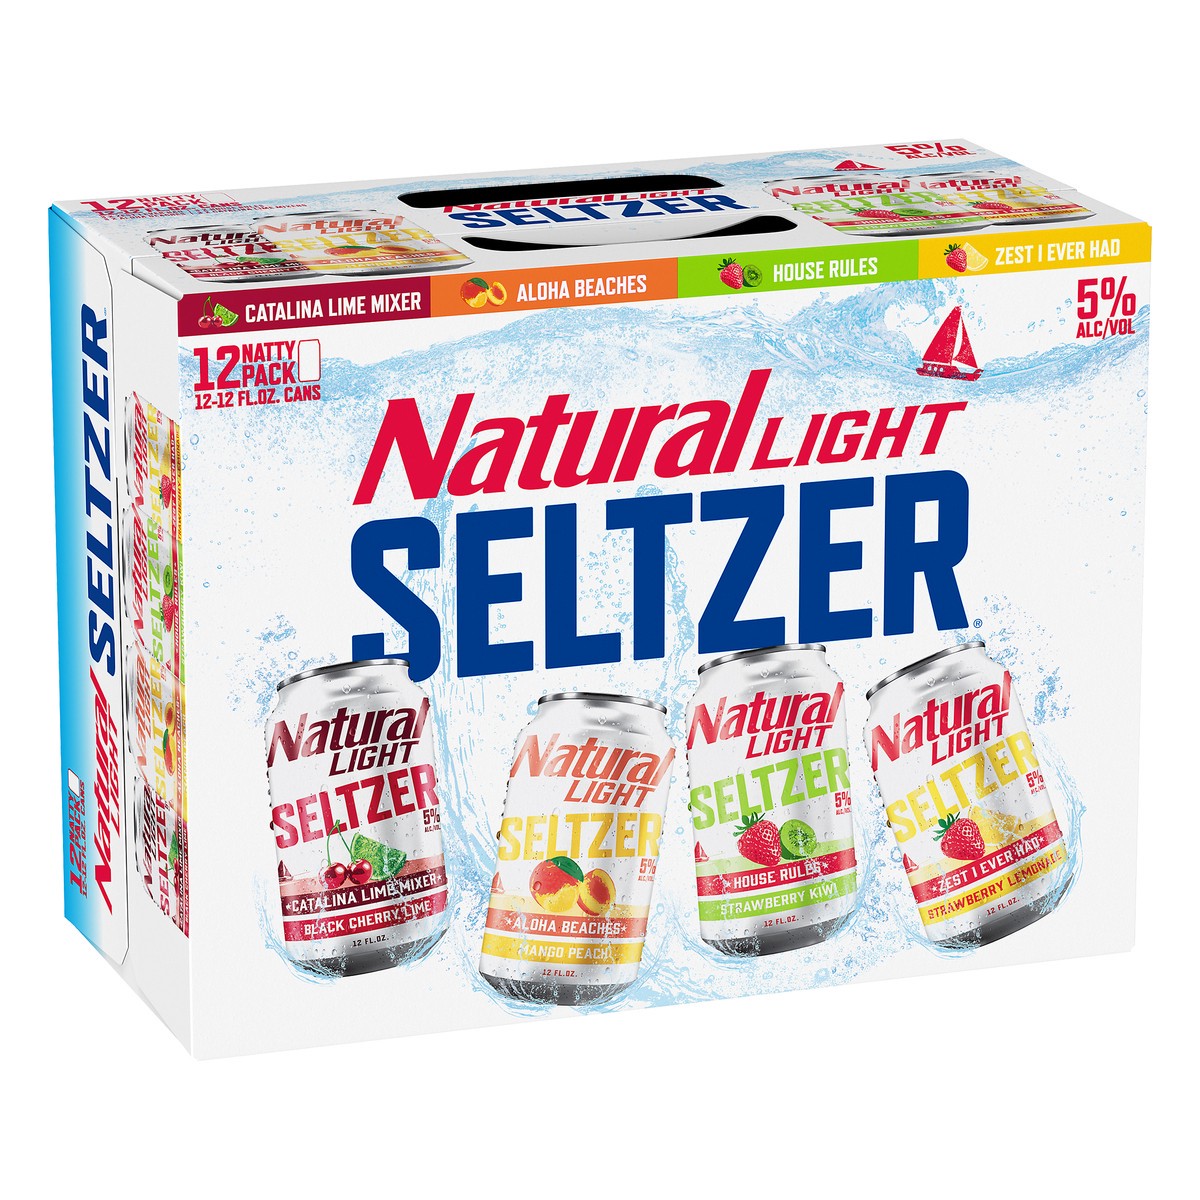 slide 3 of 8, Natural Light Hard Seltzer Variety Pack contains House Rules, Catalina Lime Mixer and Aloha Beaches hard seltzers. A refreshing blend of fruit flavors creates a light, fizzy drink. Each serving contains 133 calories and 6% ABV. 12 pack., 12 ct